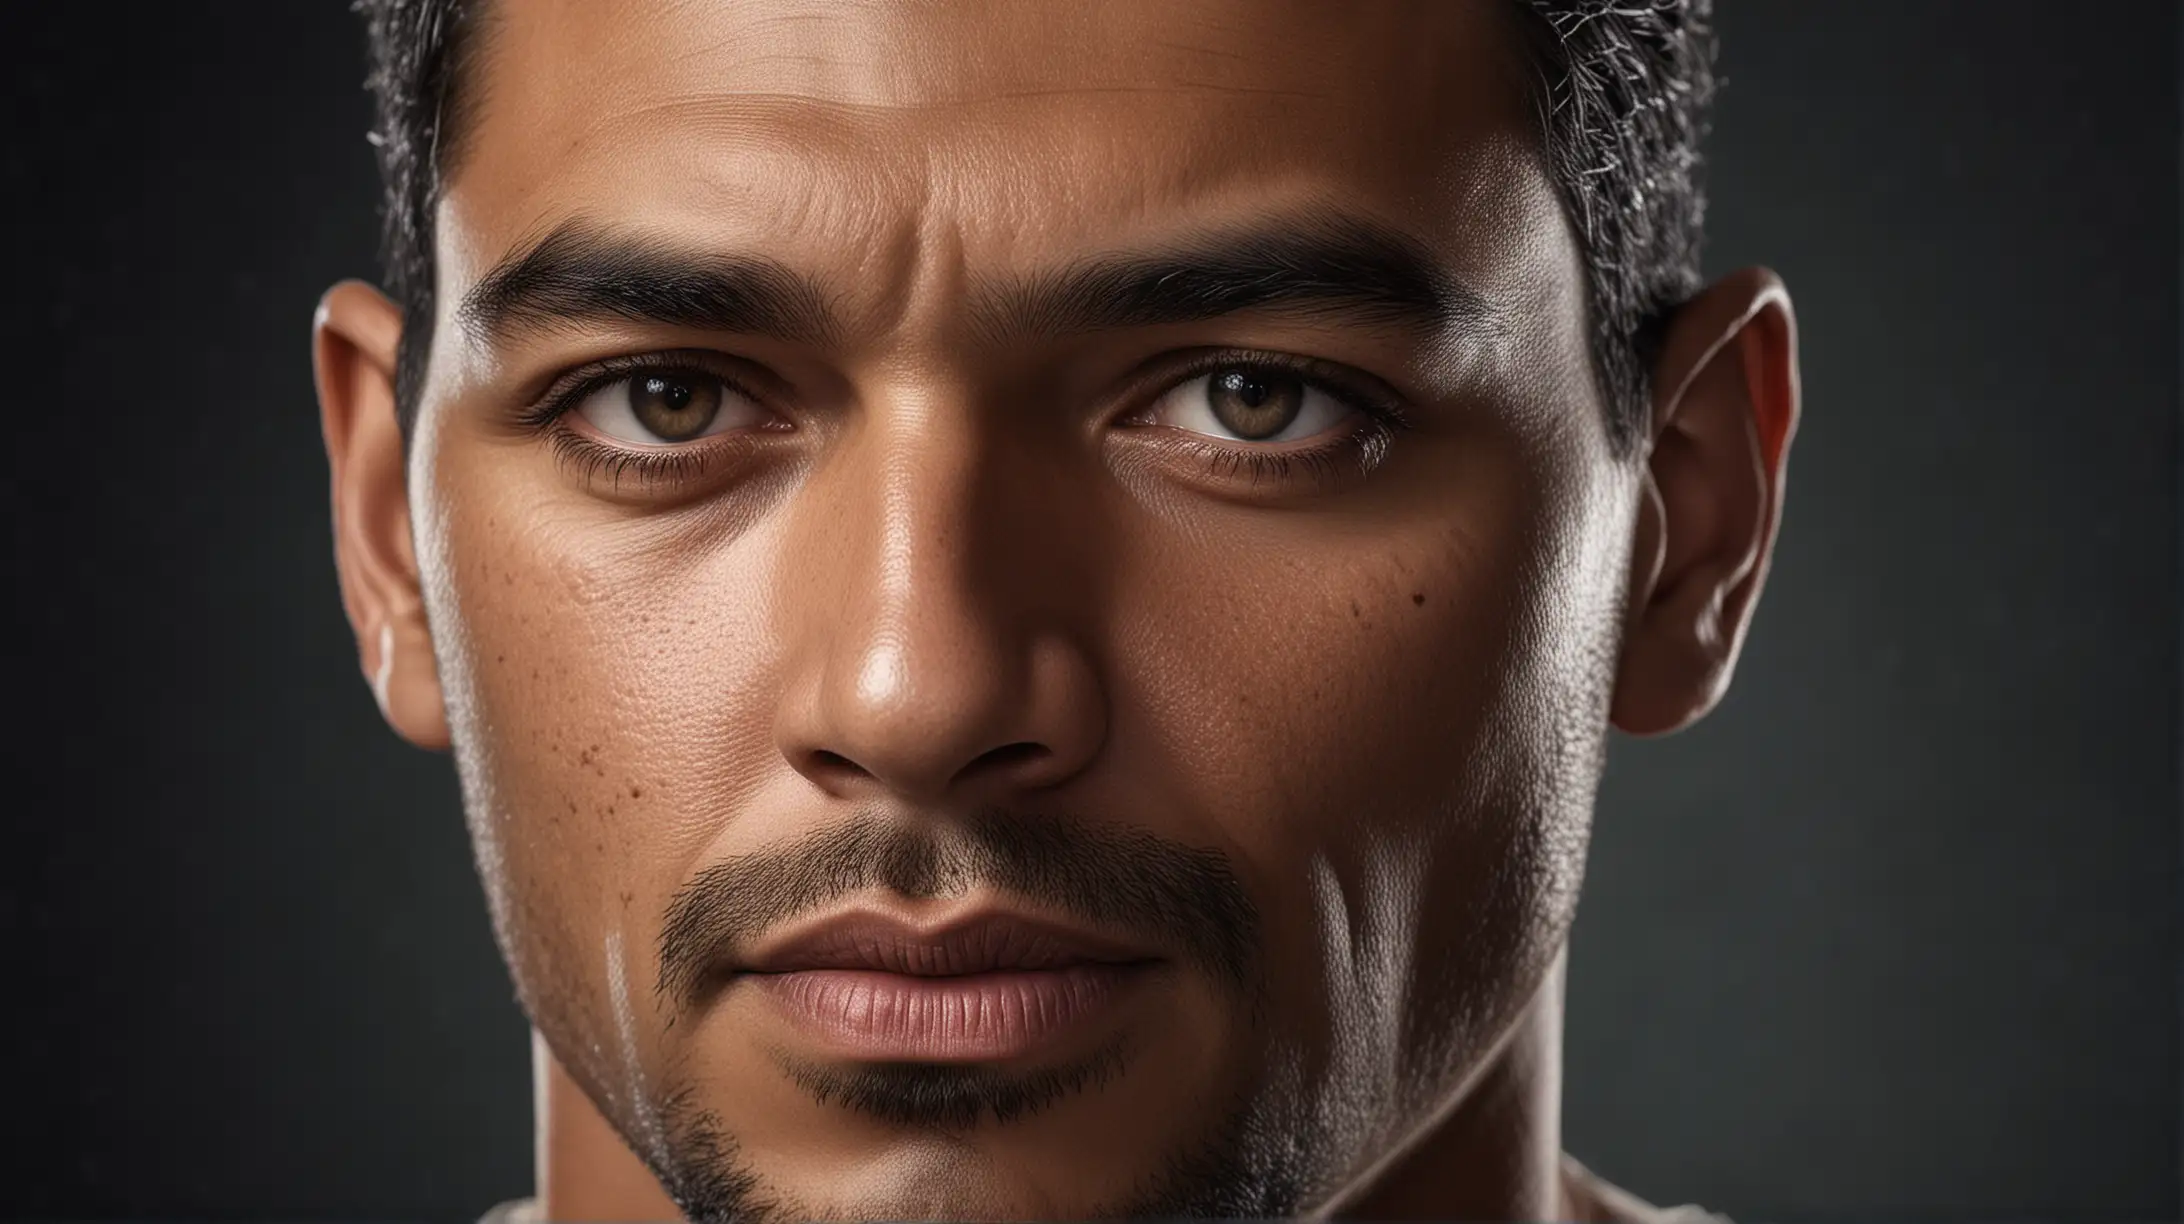 Portrait of a Thoughtful MixedRace Man in Cinematic Lighting